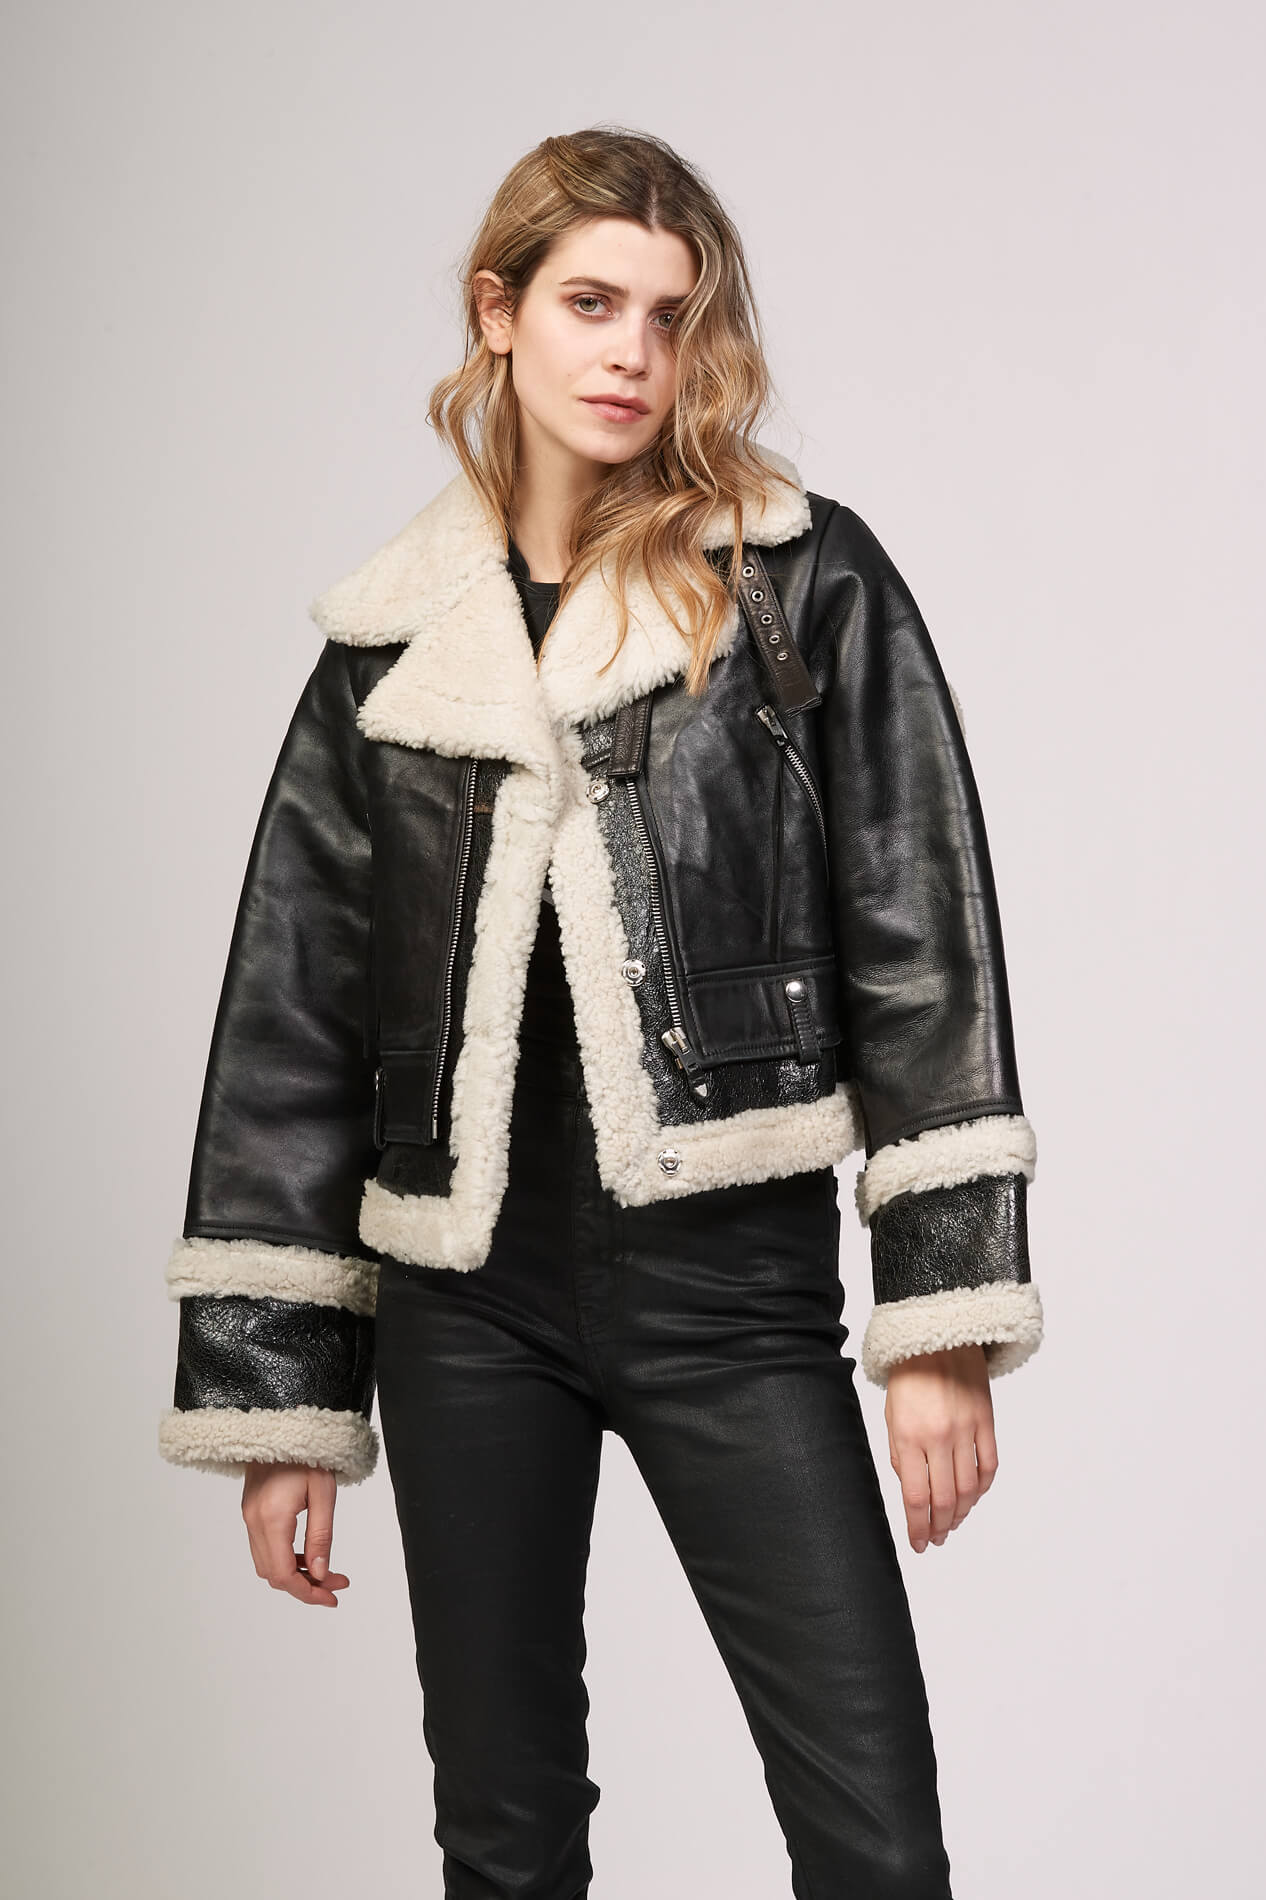 LOU SHEARLING Black leather jacket. Lining, contour and lapels in white shearling. Frontal buttons. Wrist bands with buttons. 2 side pockets. 100% sheepskin. Made in Italy. HTC LOS ANGELES